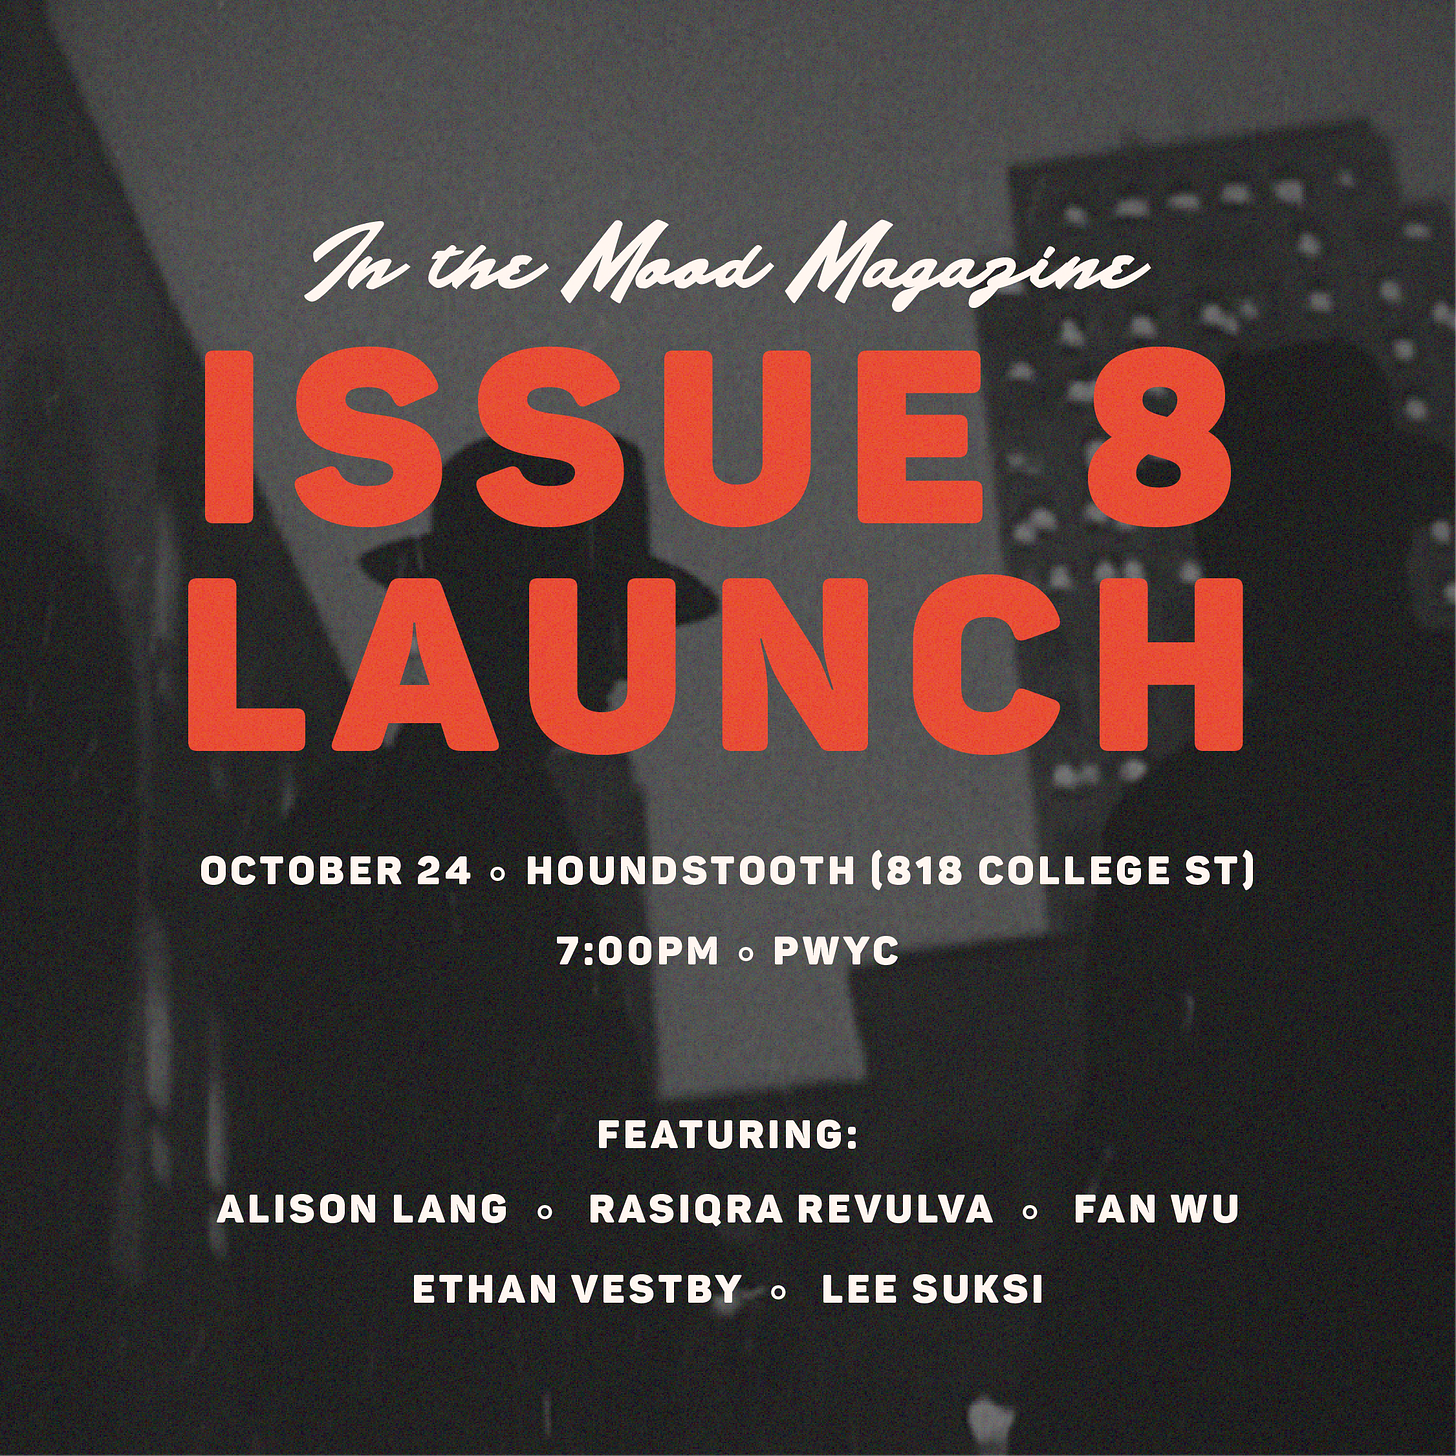 In The Mood Issue 8 launch poster with silhouettes of men in hats and trenchcoats against a city at night